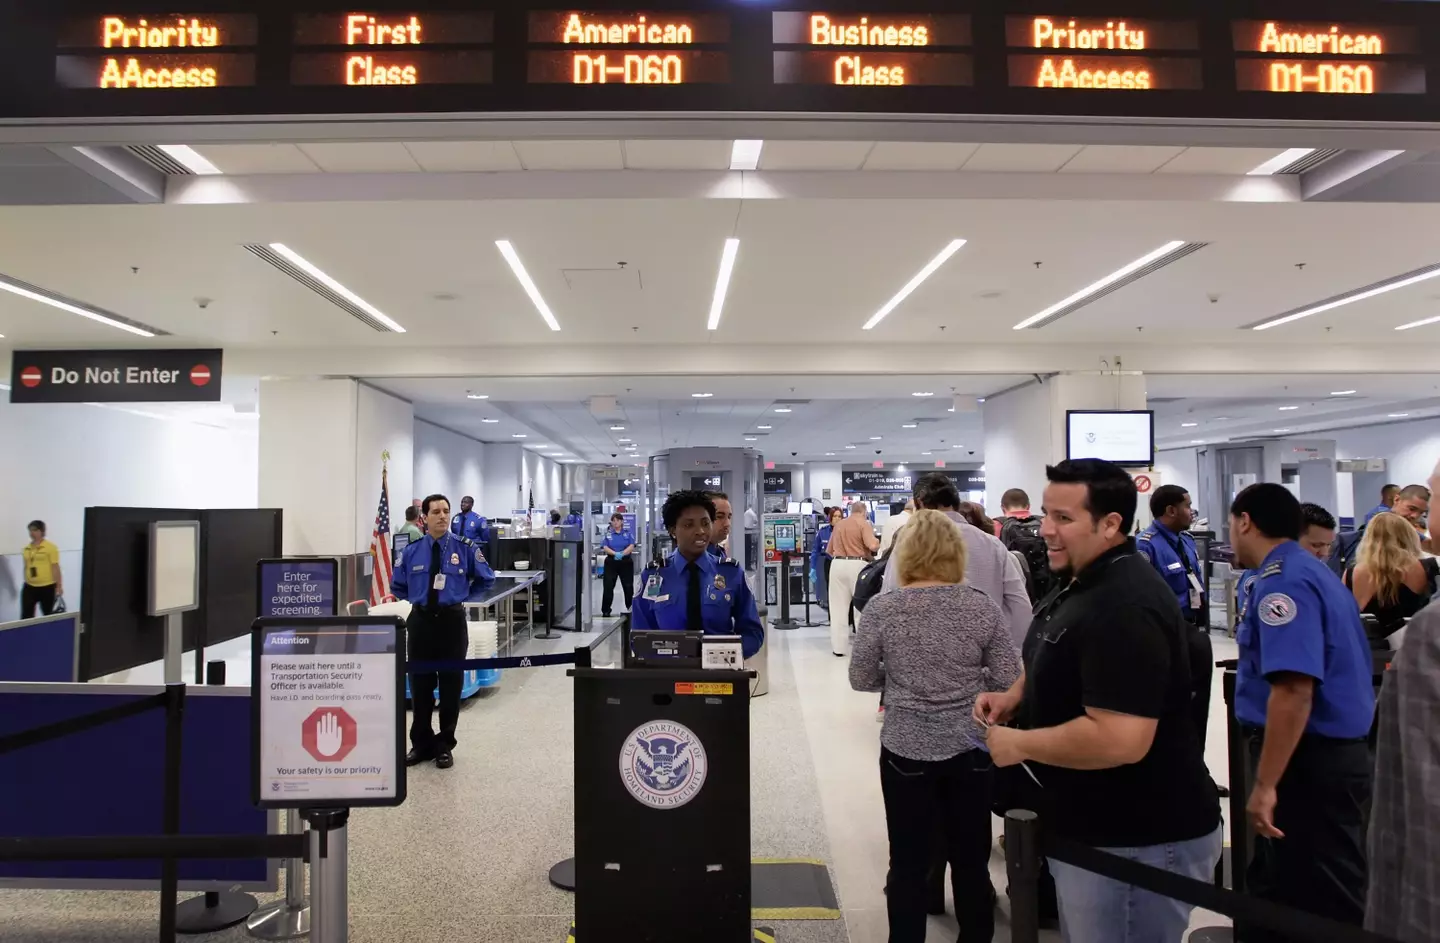 Most people are used to being scanned at the airport. (Joe Raedle/Getty Images)